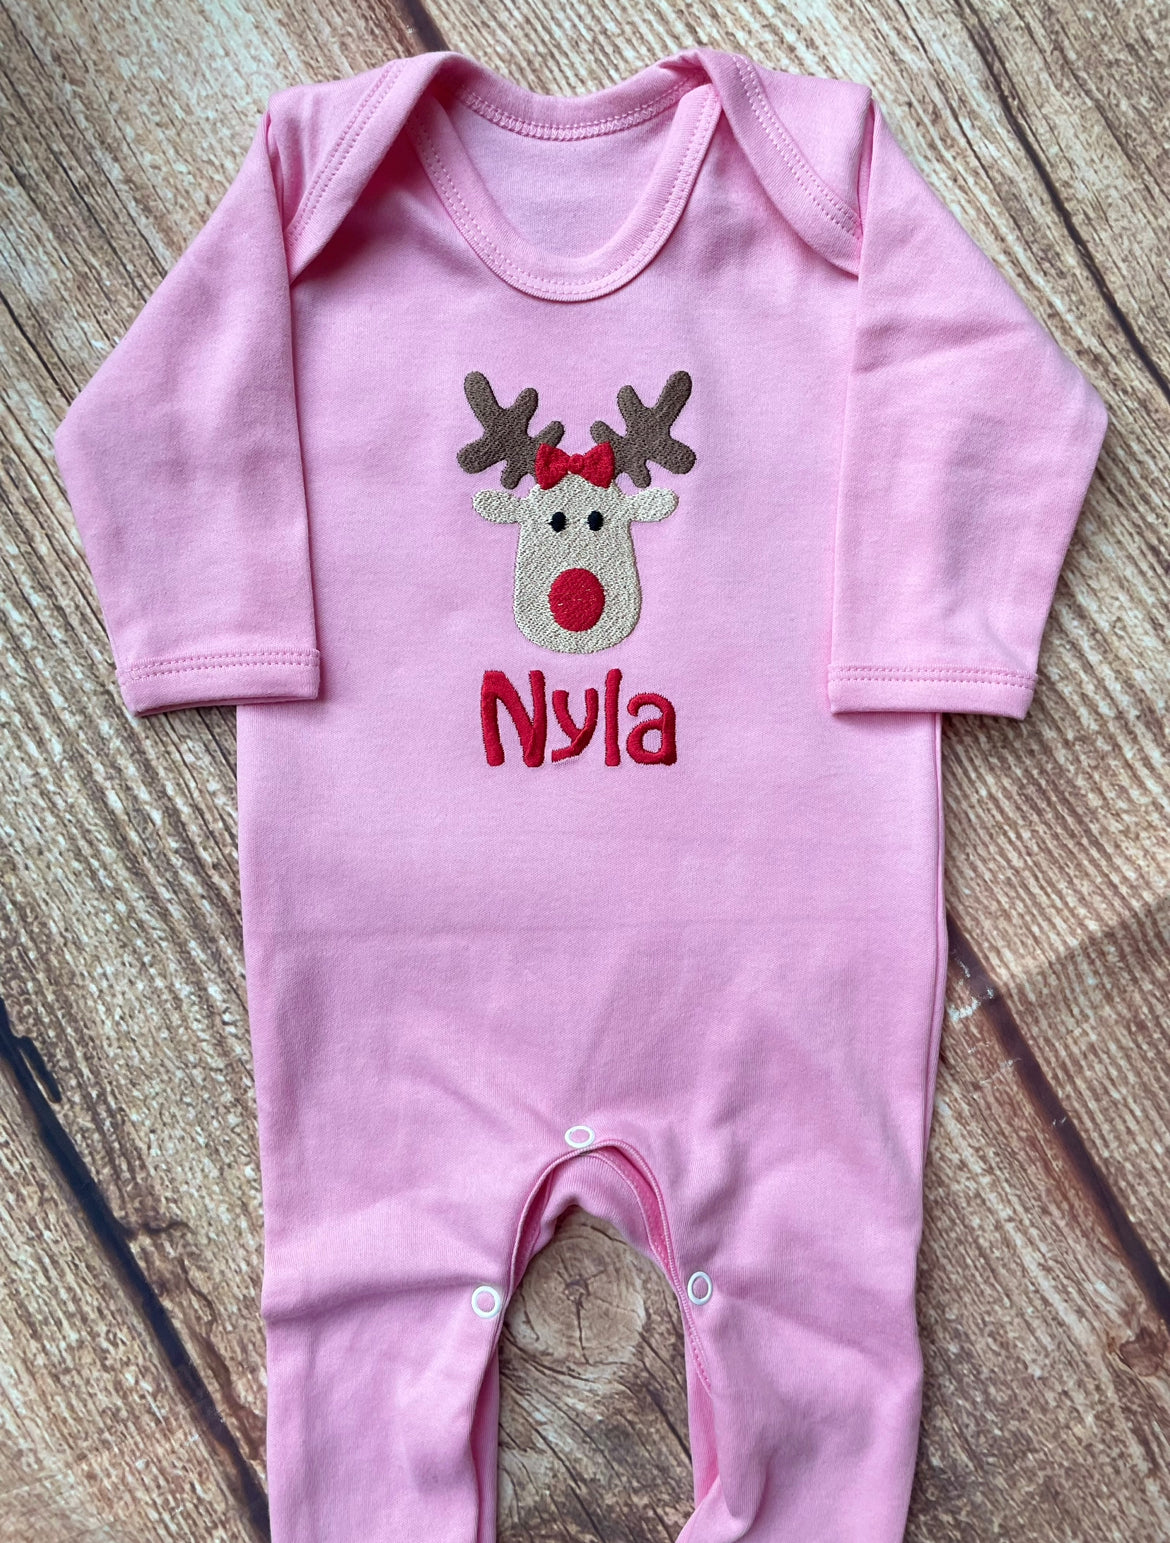 Christmas onesie / sleepsuit embroidered & personalised with name. Choice of designs. Gift, keepsake